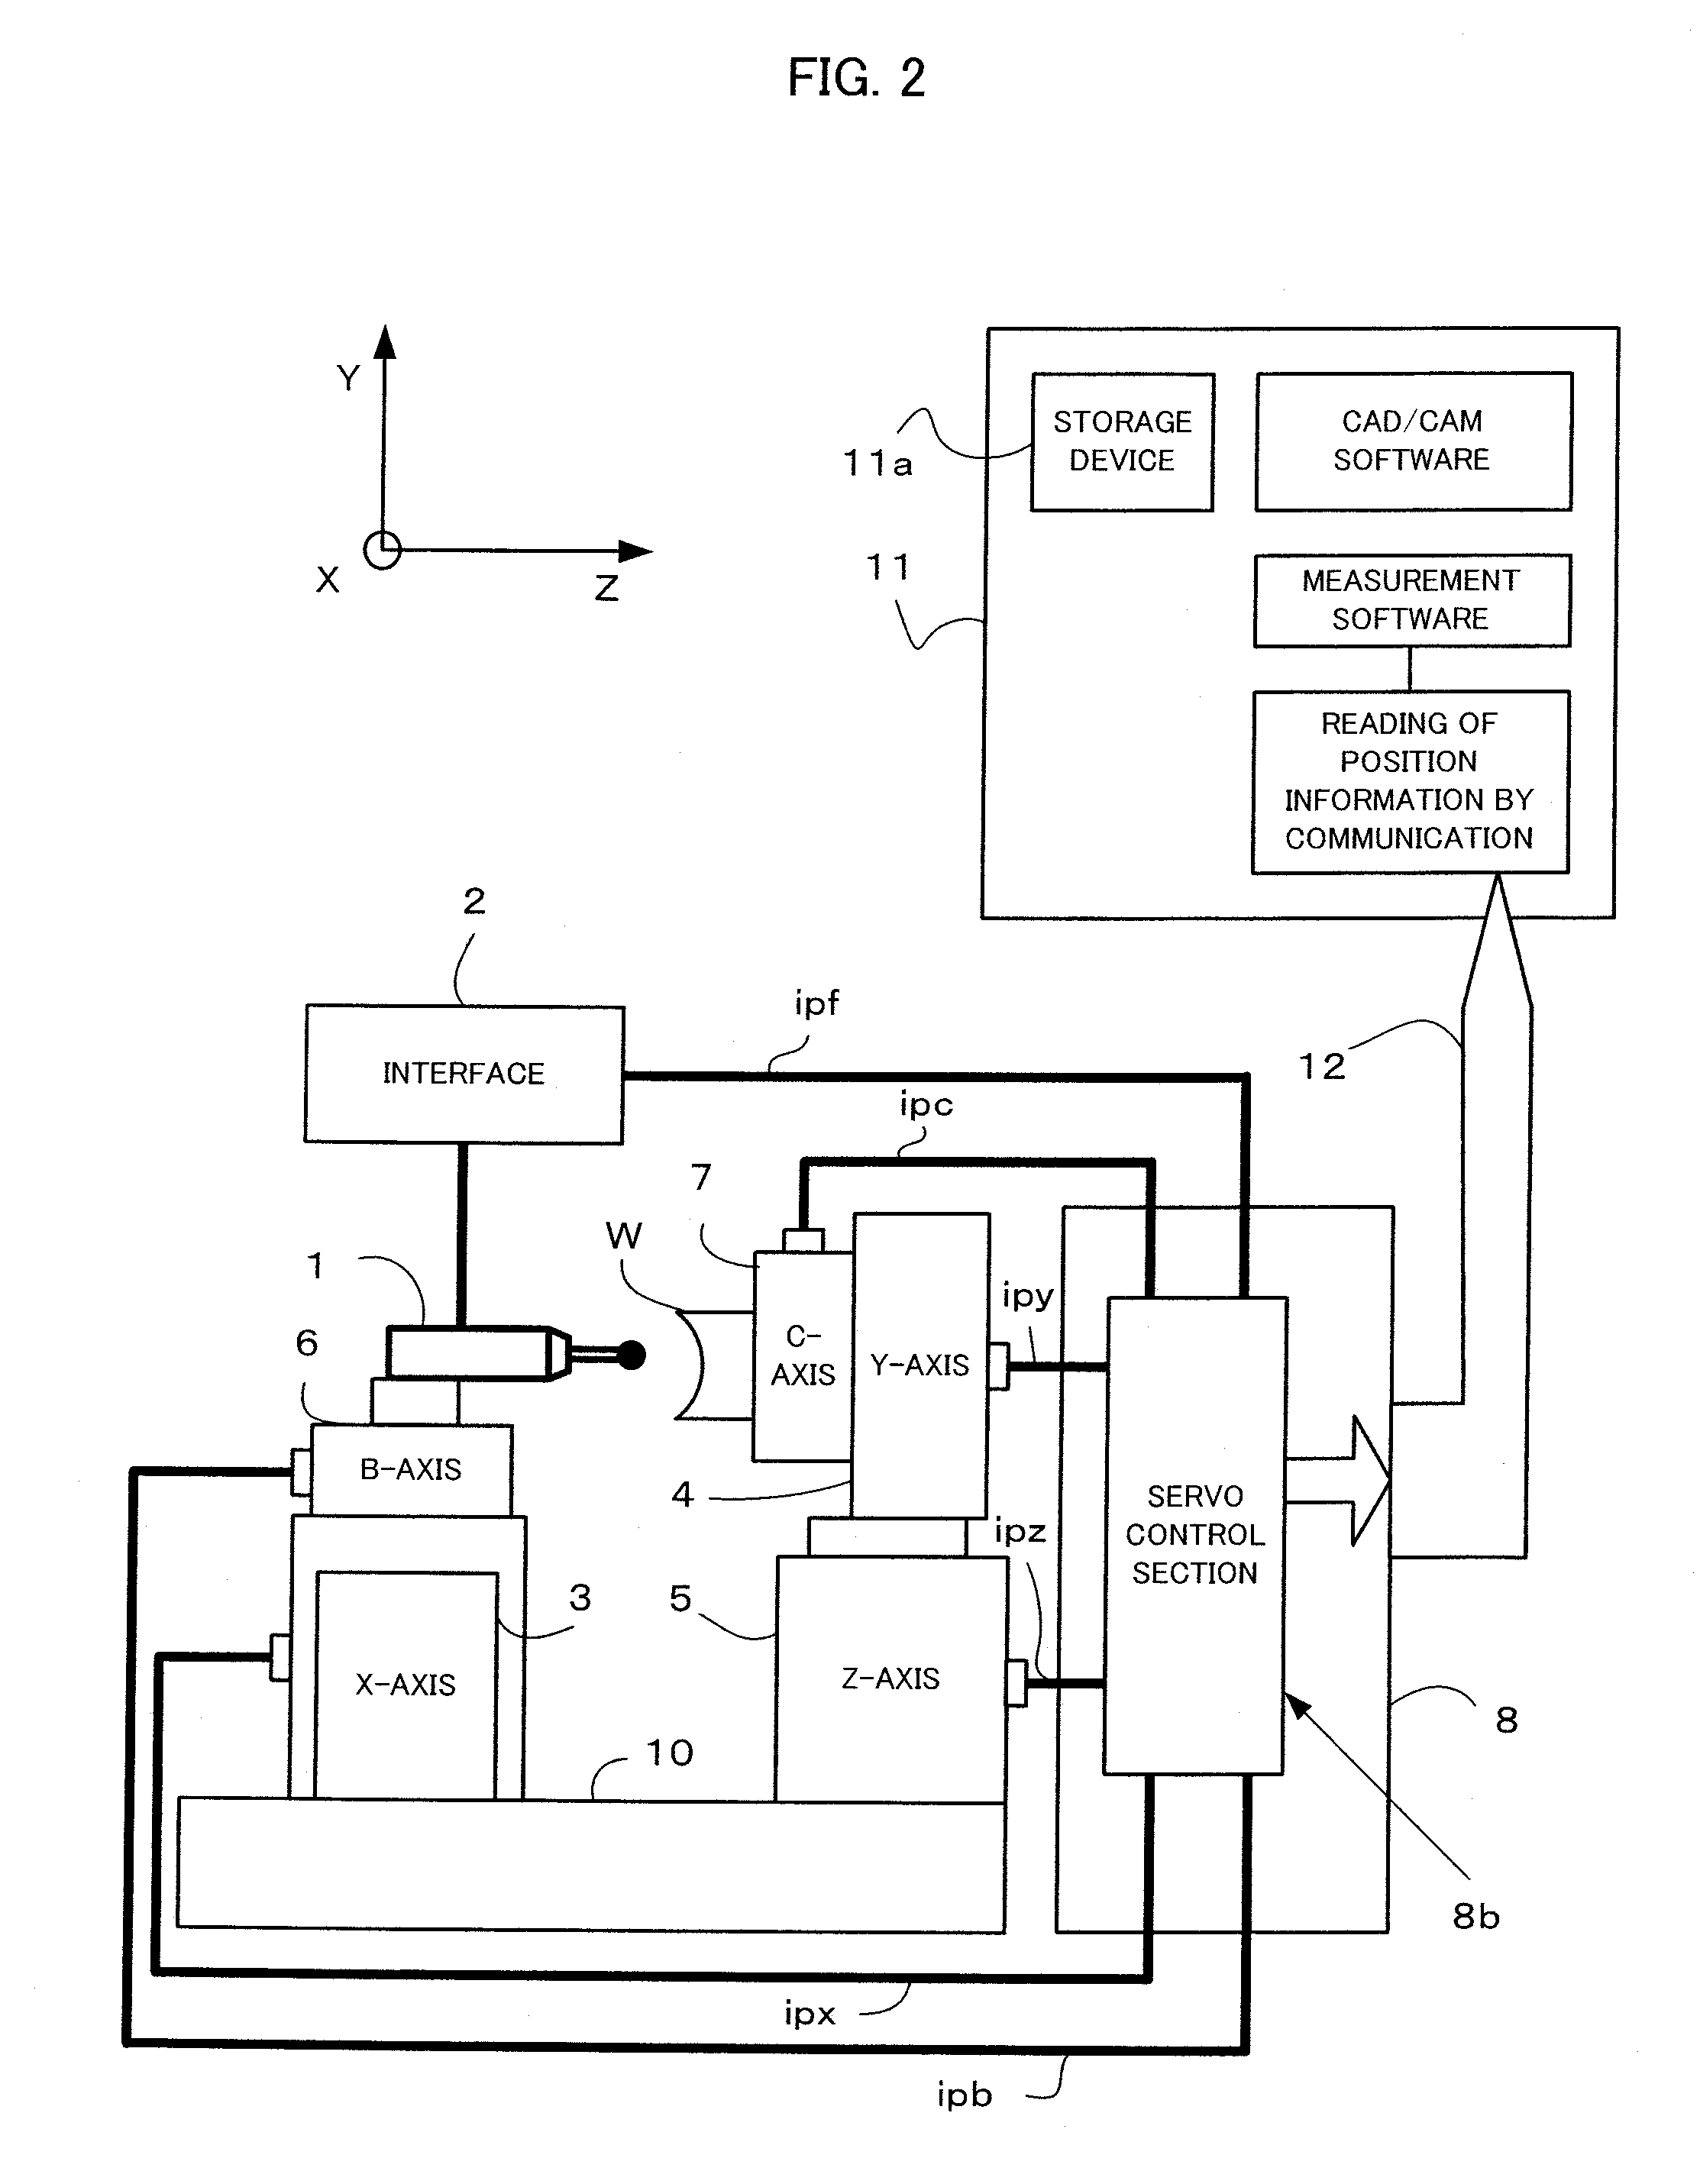 Machine tool with numerical controller and on-machine measuring device